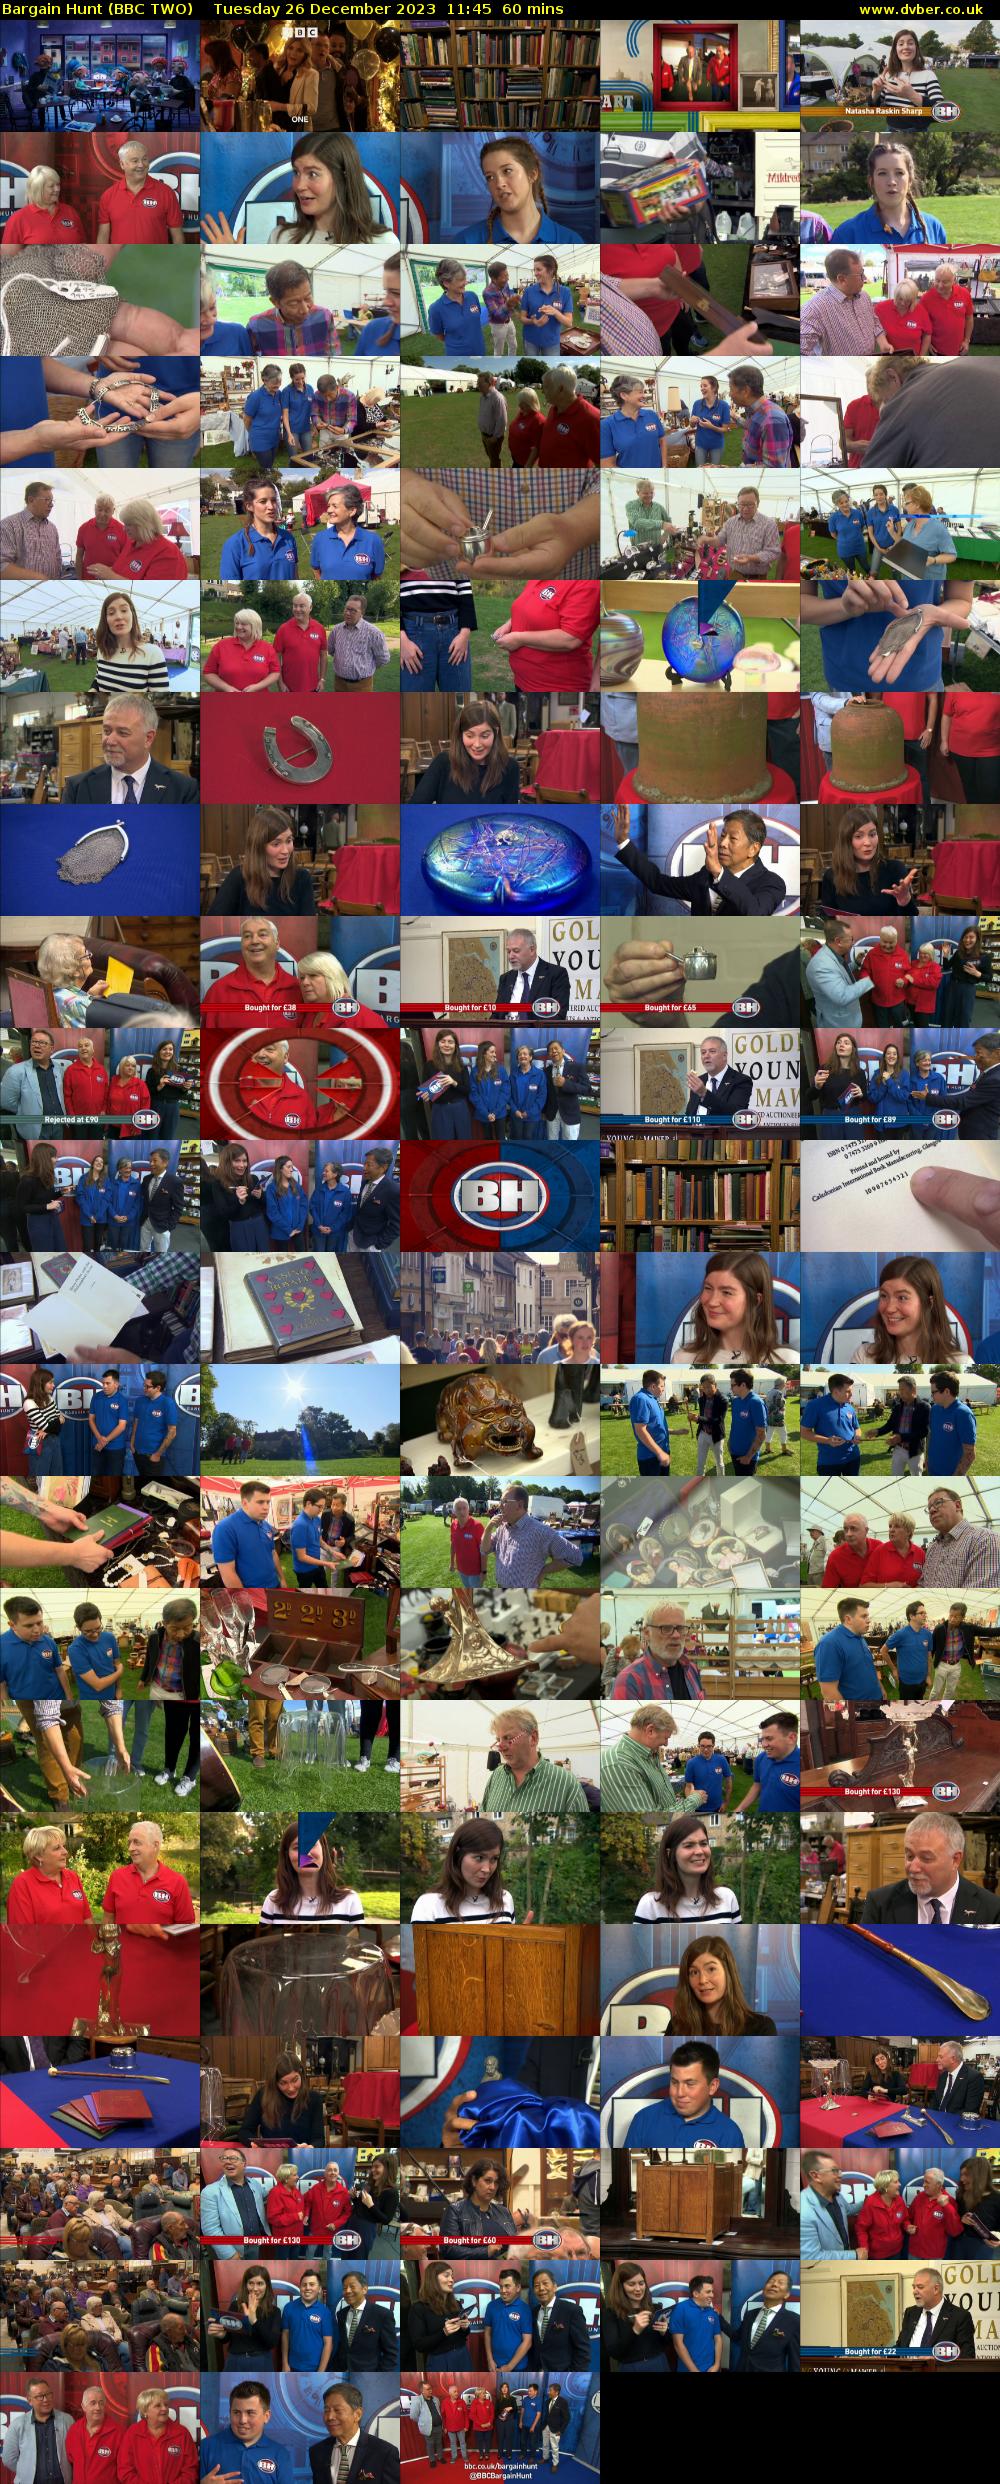 Bargain Hunt (BBC TWO) Tuesday 26 December 2023 11:45 - 12:45